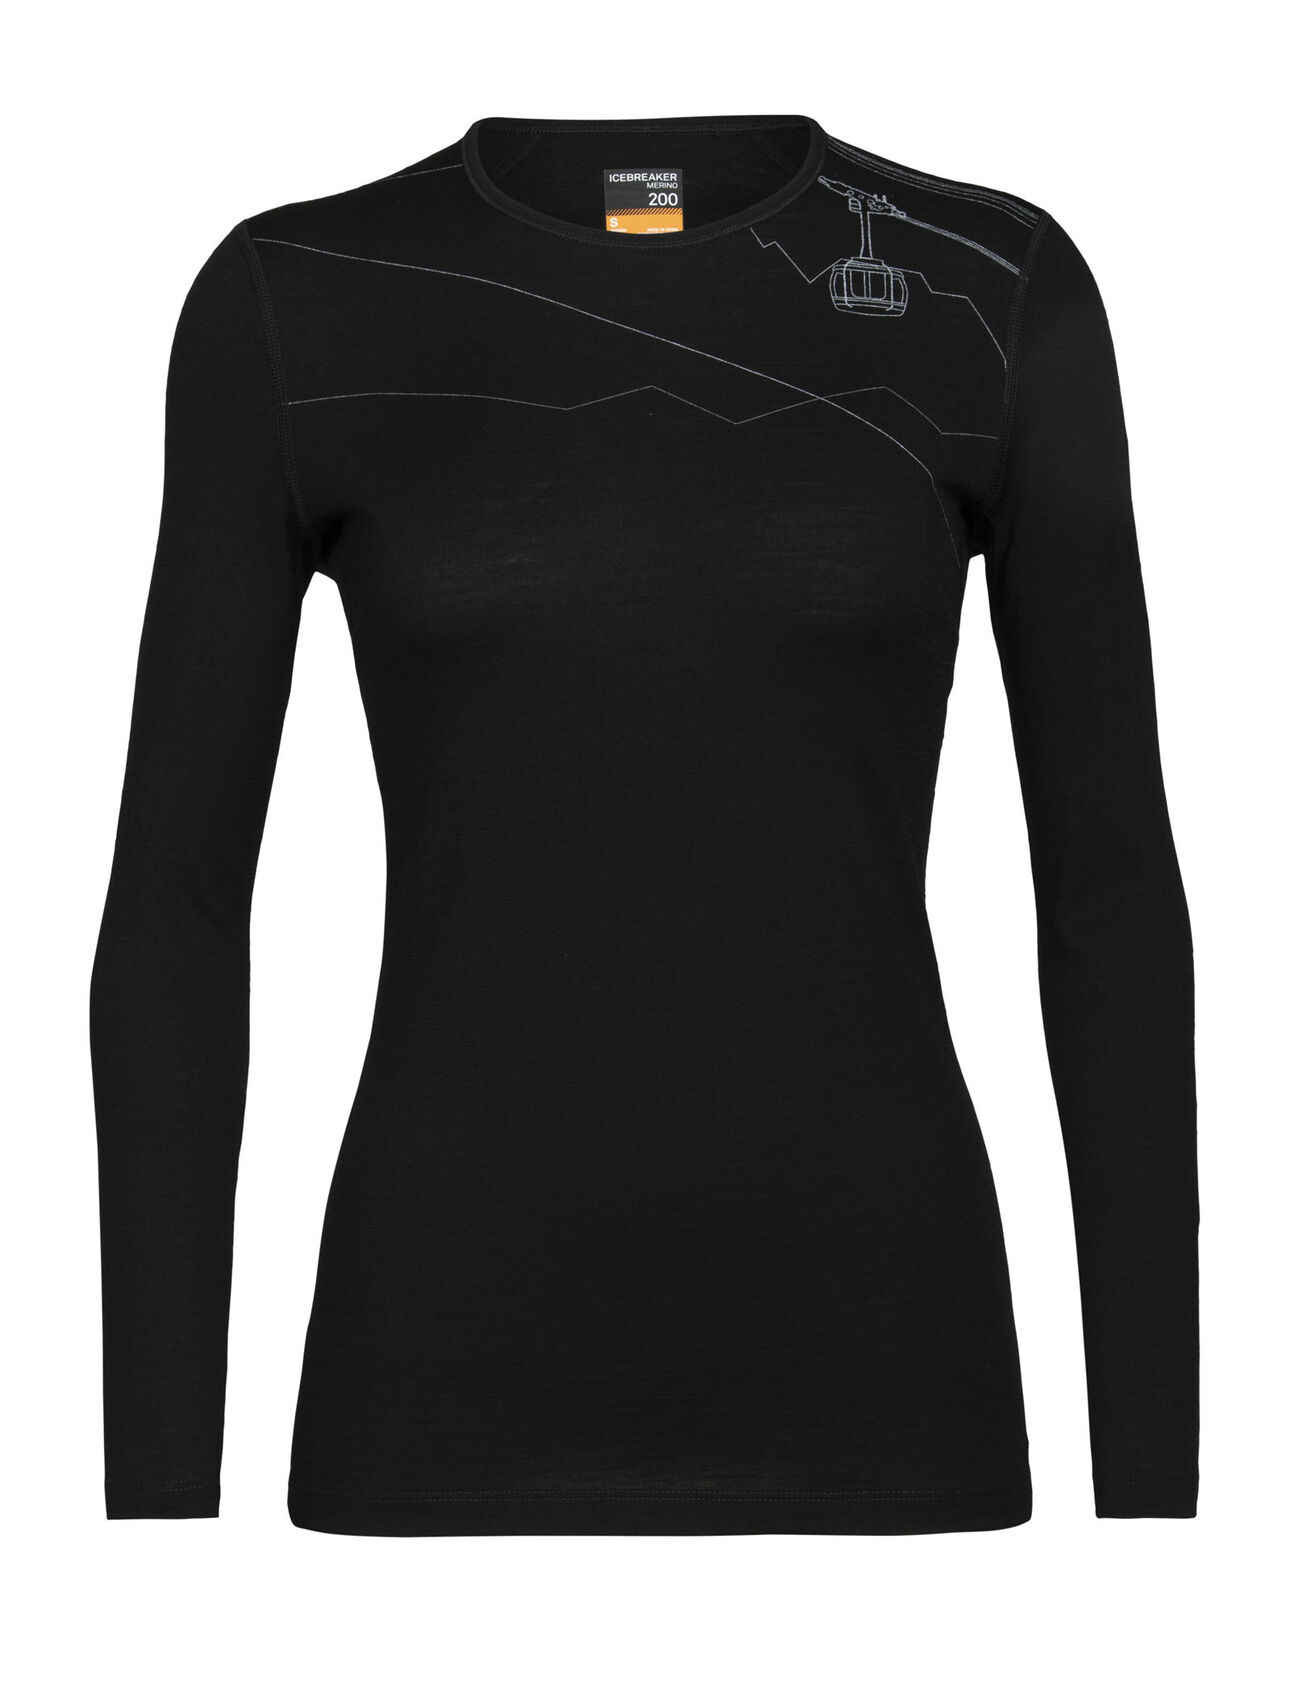 Womens Merino 200 Oasis Long Sleeve Crewe Thermal Top Skyway Lift Our versatile, go-anywhere shirt made from breathable 100% merino wool jersey, the 200 Oasis Long Sleeve Crewe Skyway Lift is our best-selling base layer top. 